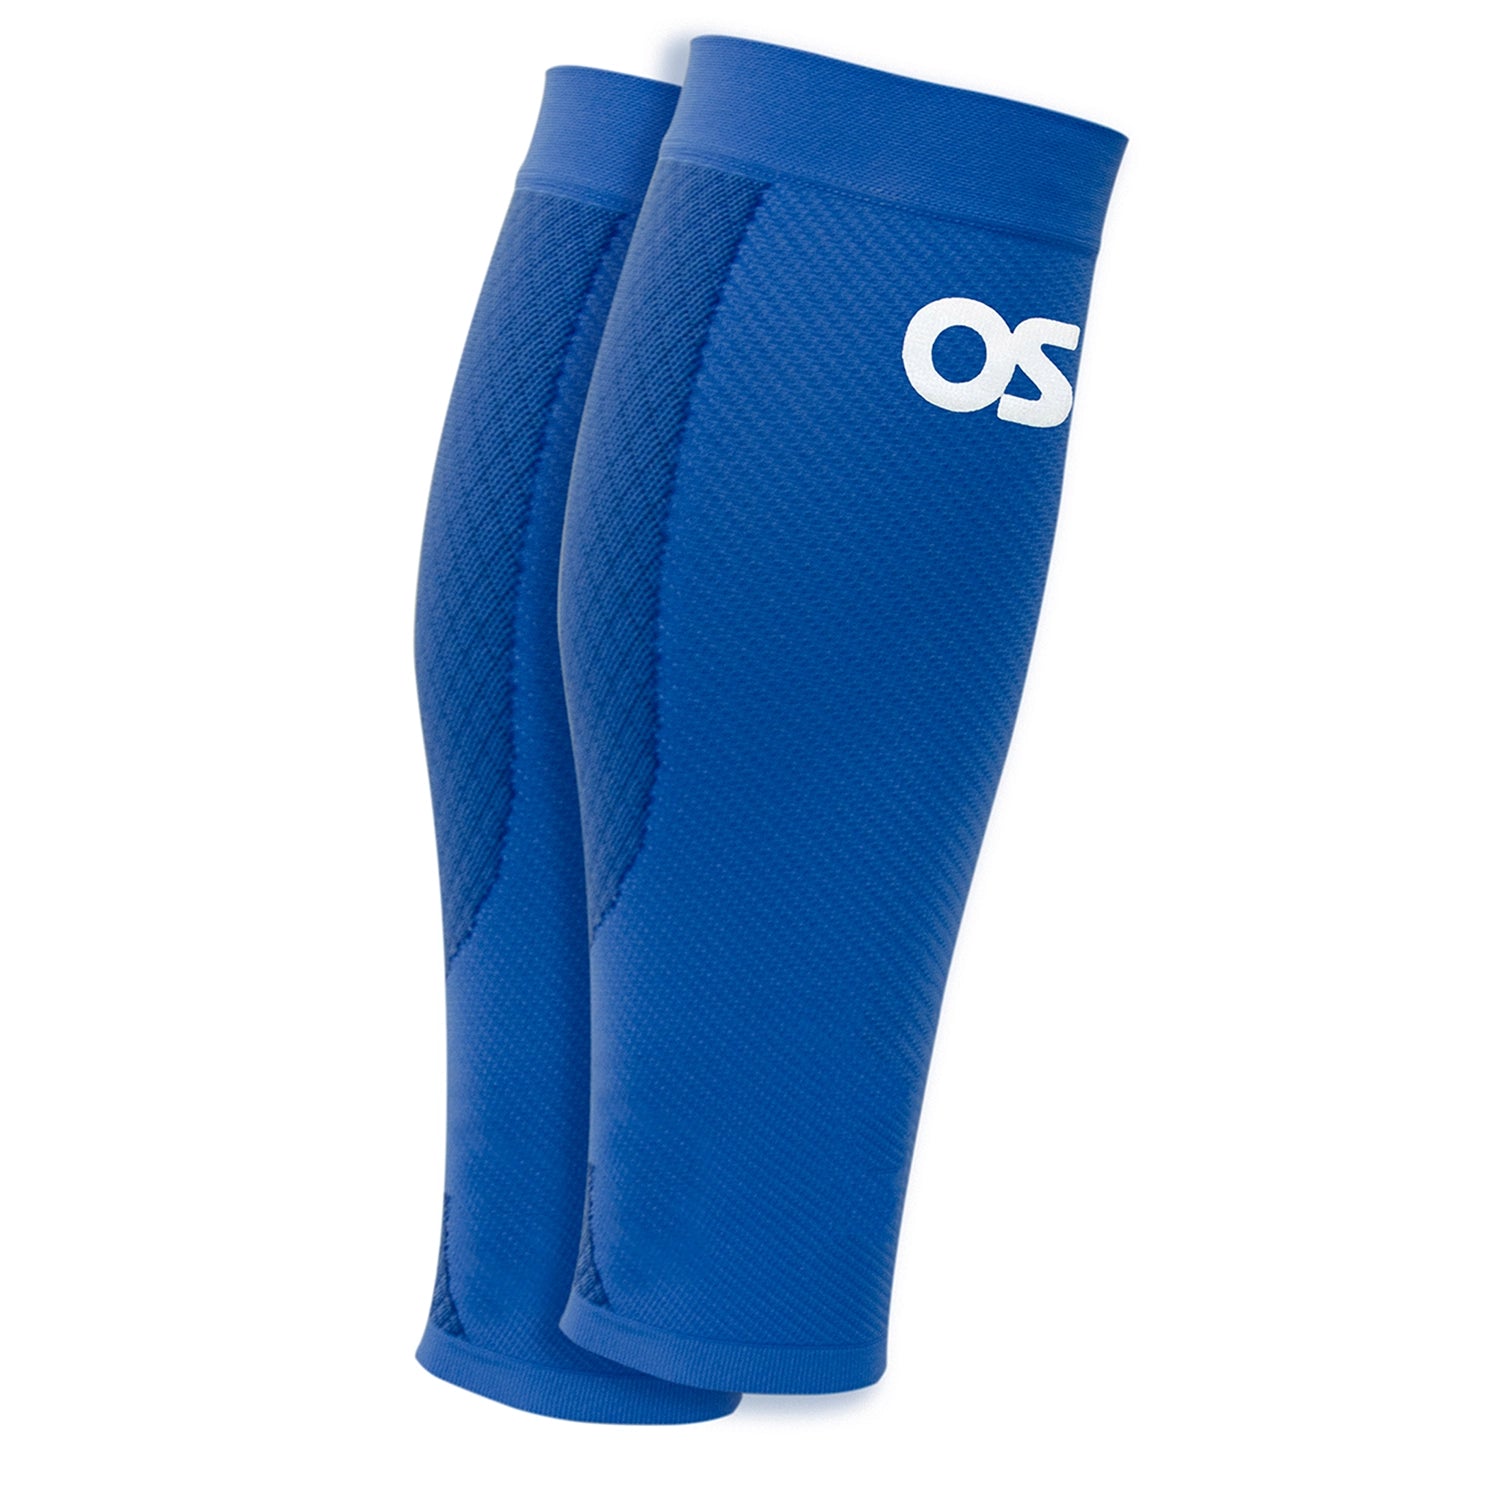 Signature Calf Compression Sleeves, High-Performance